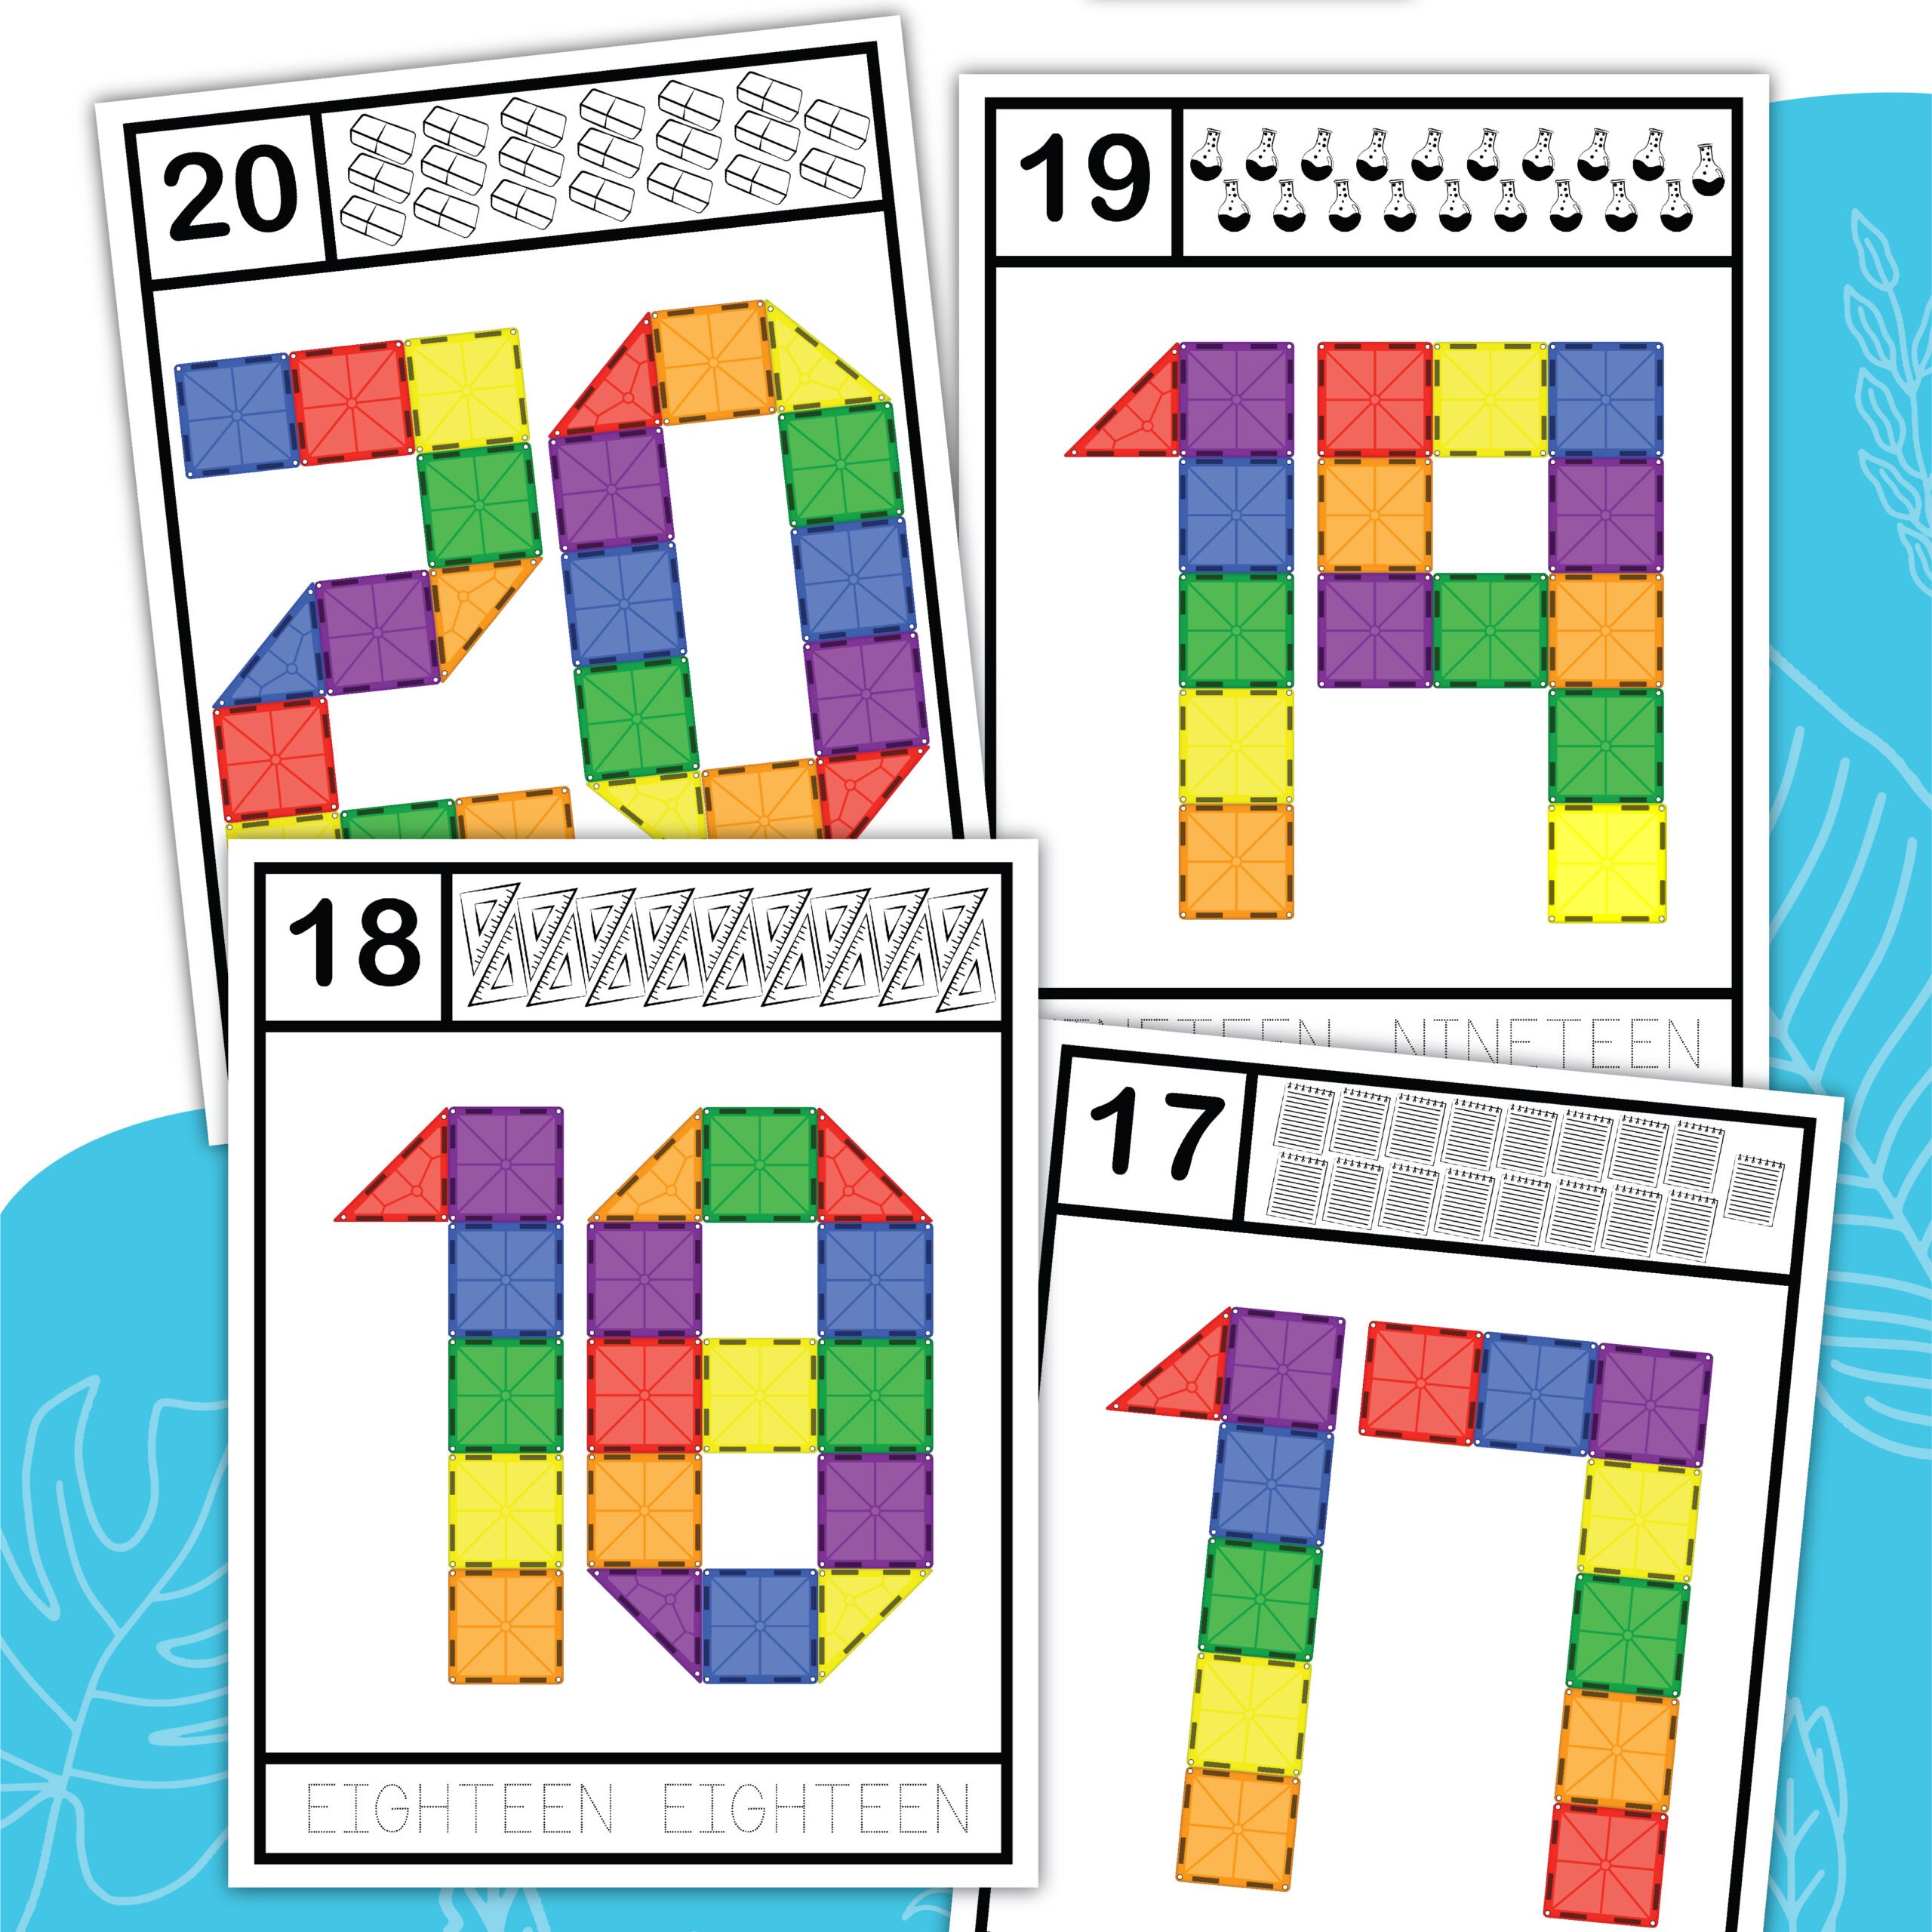 https://teachingmama.org/wp-content/uploads/2022/02/magna-tile-cards-for-numbers-square-scaled.jpg